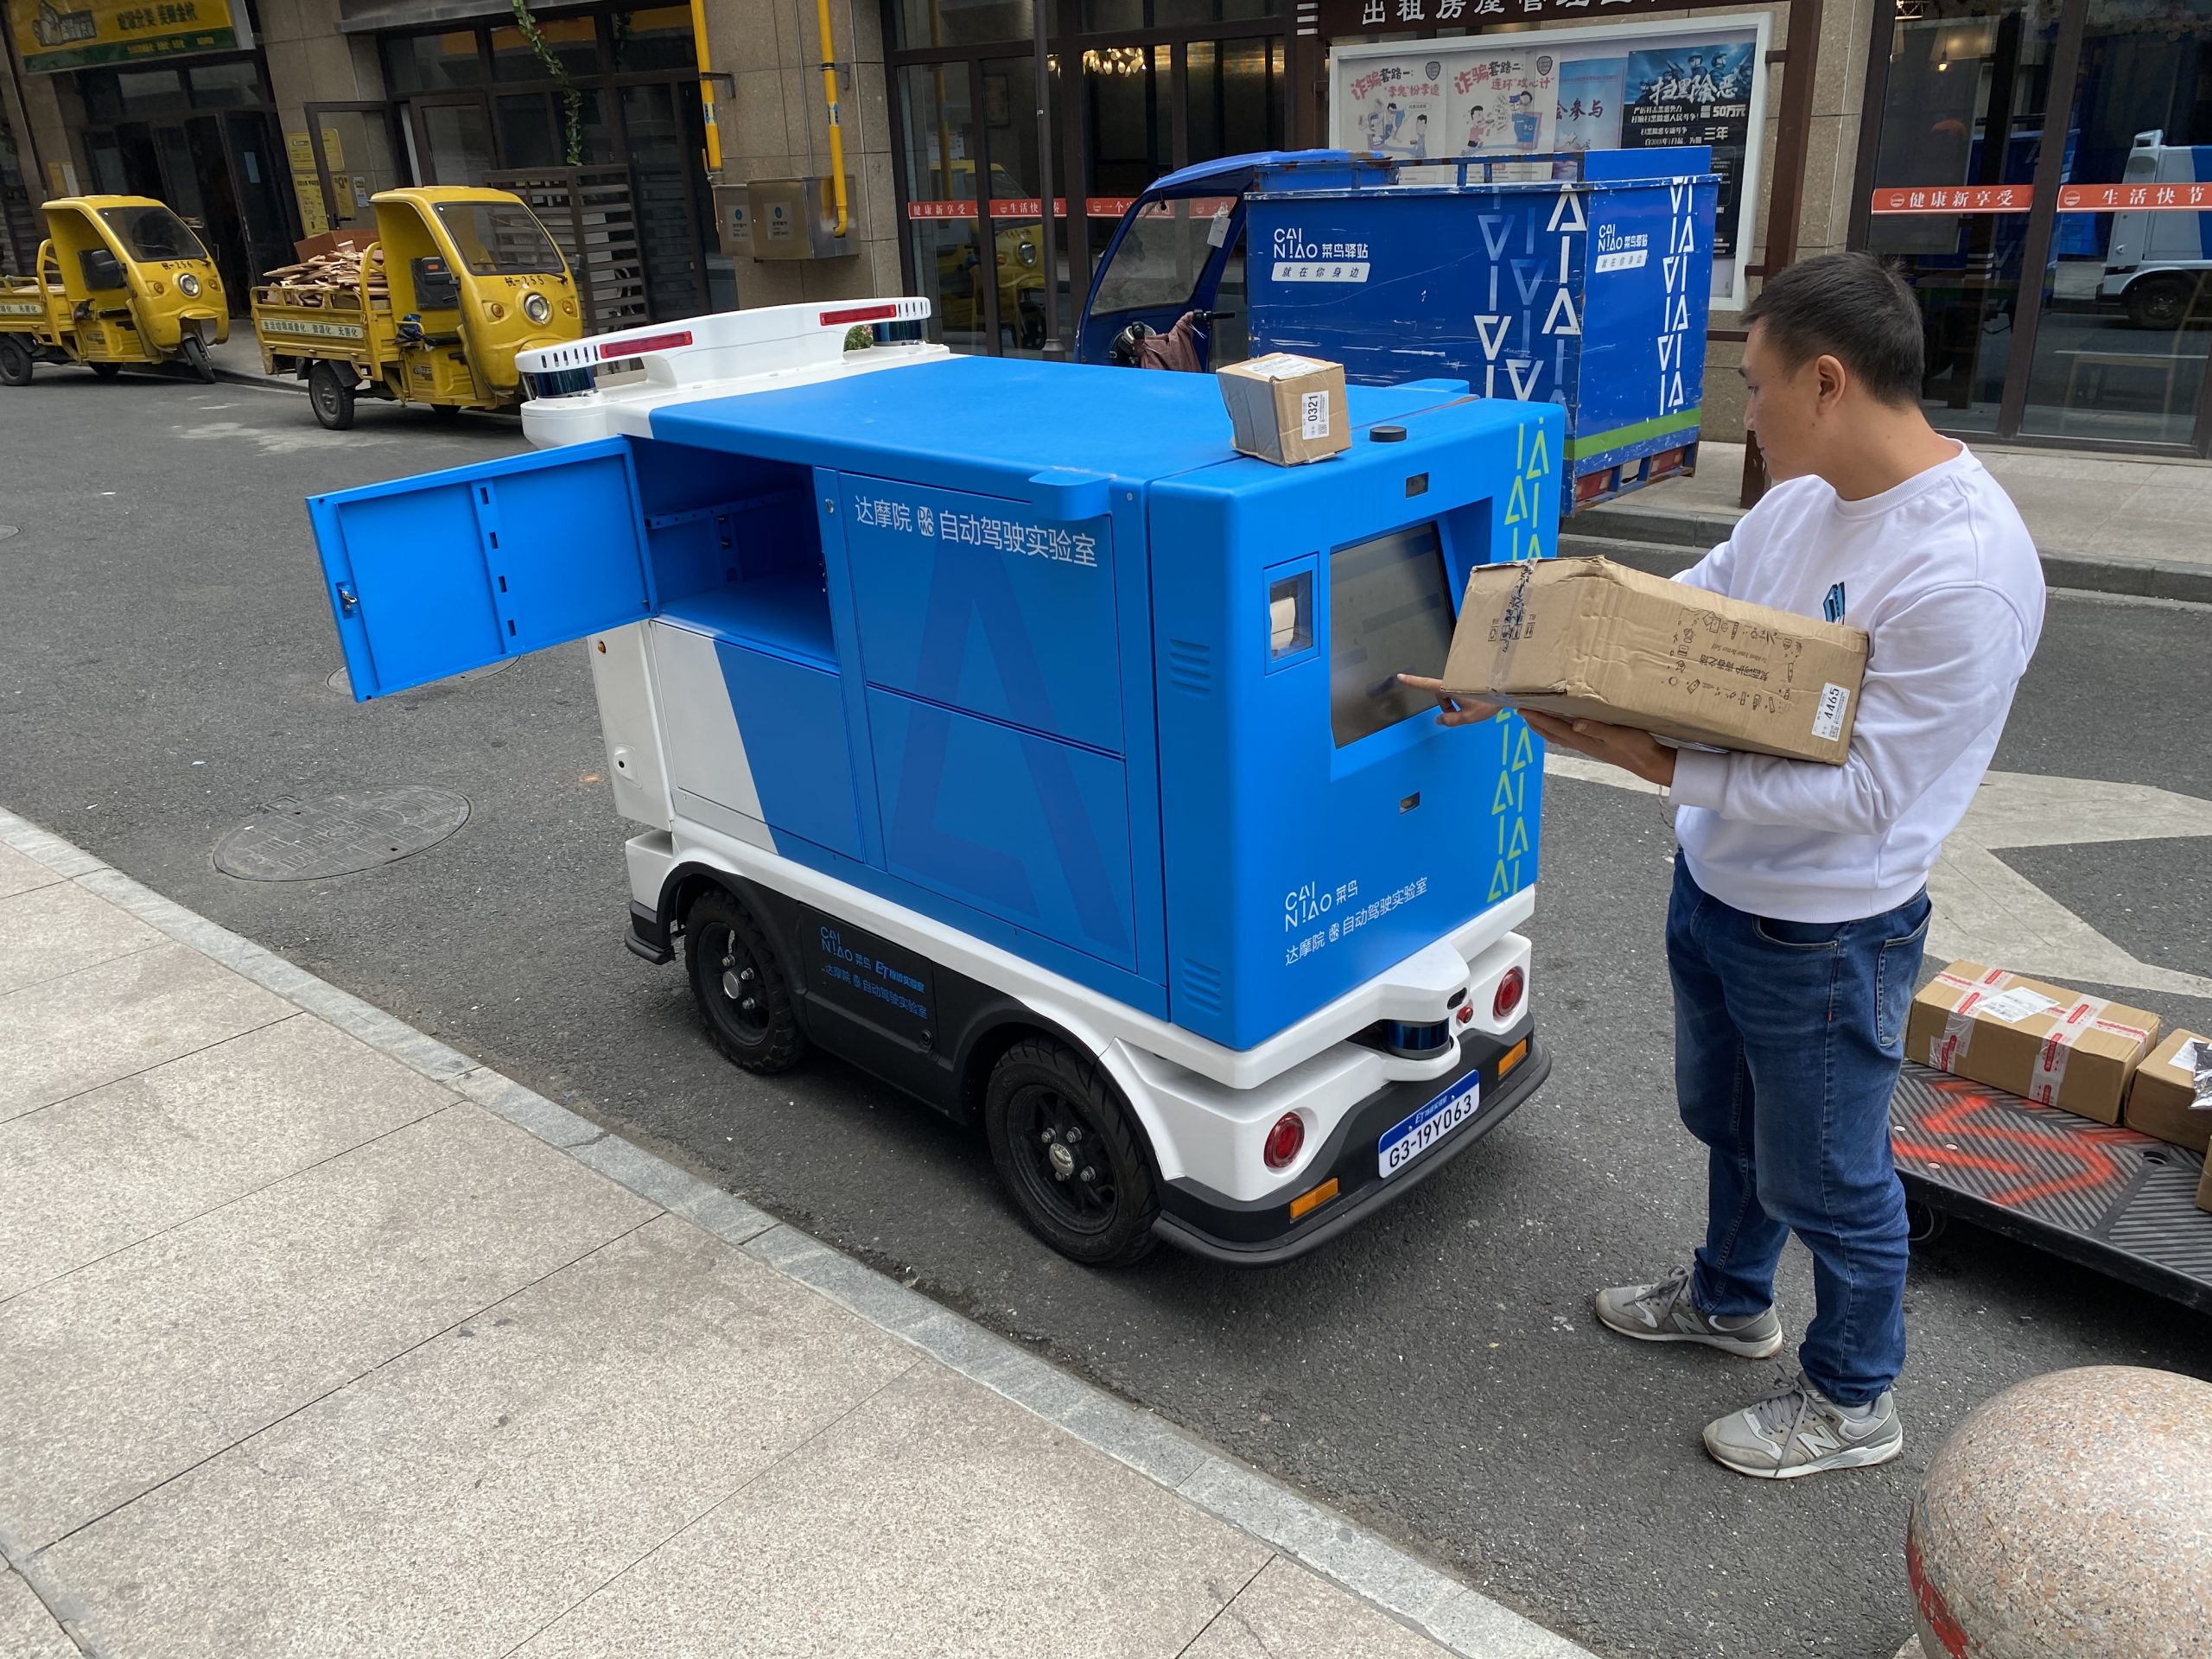 Cainiao engineer Long Fei loads packages onto the firm’s Xiao G automated delivery vehicle in Hangzhou, China on Oct. 19, 2020.